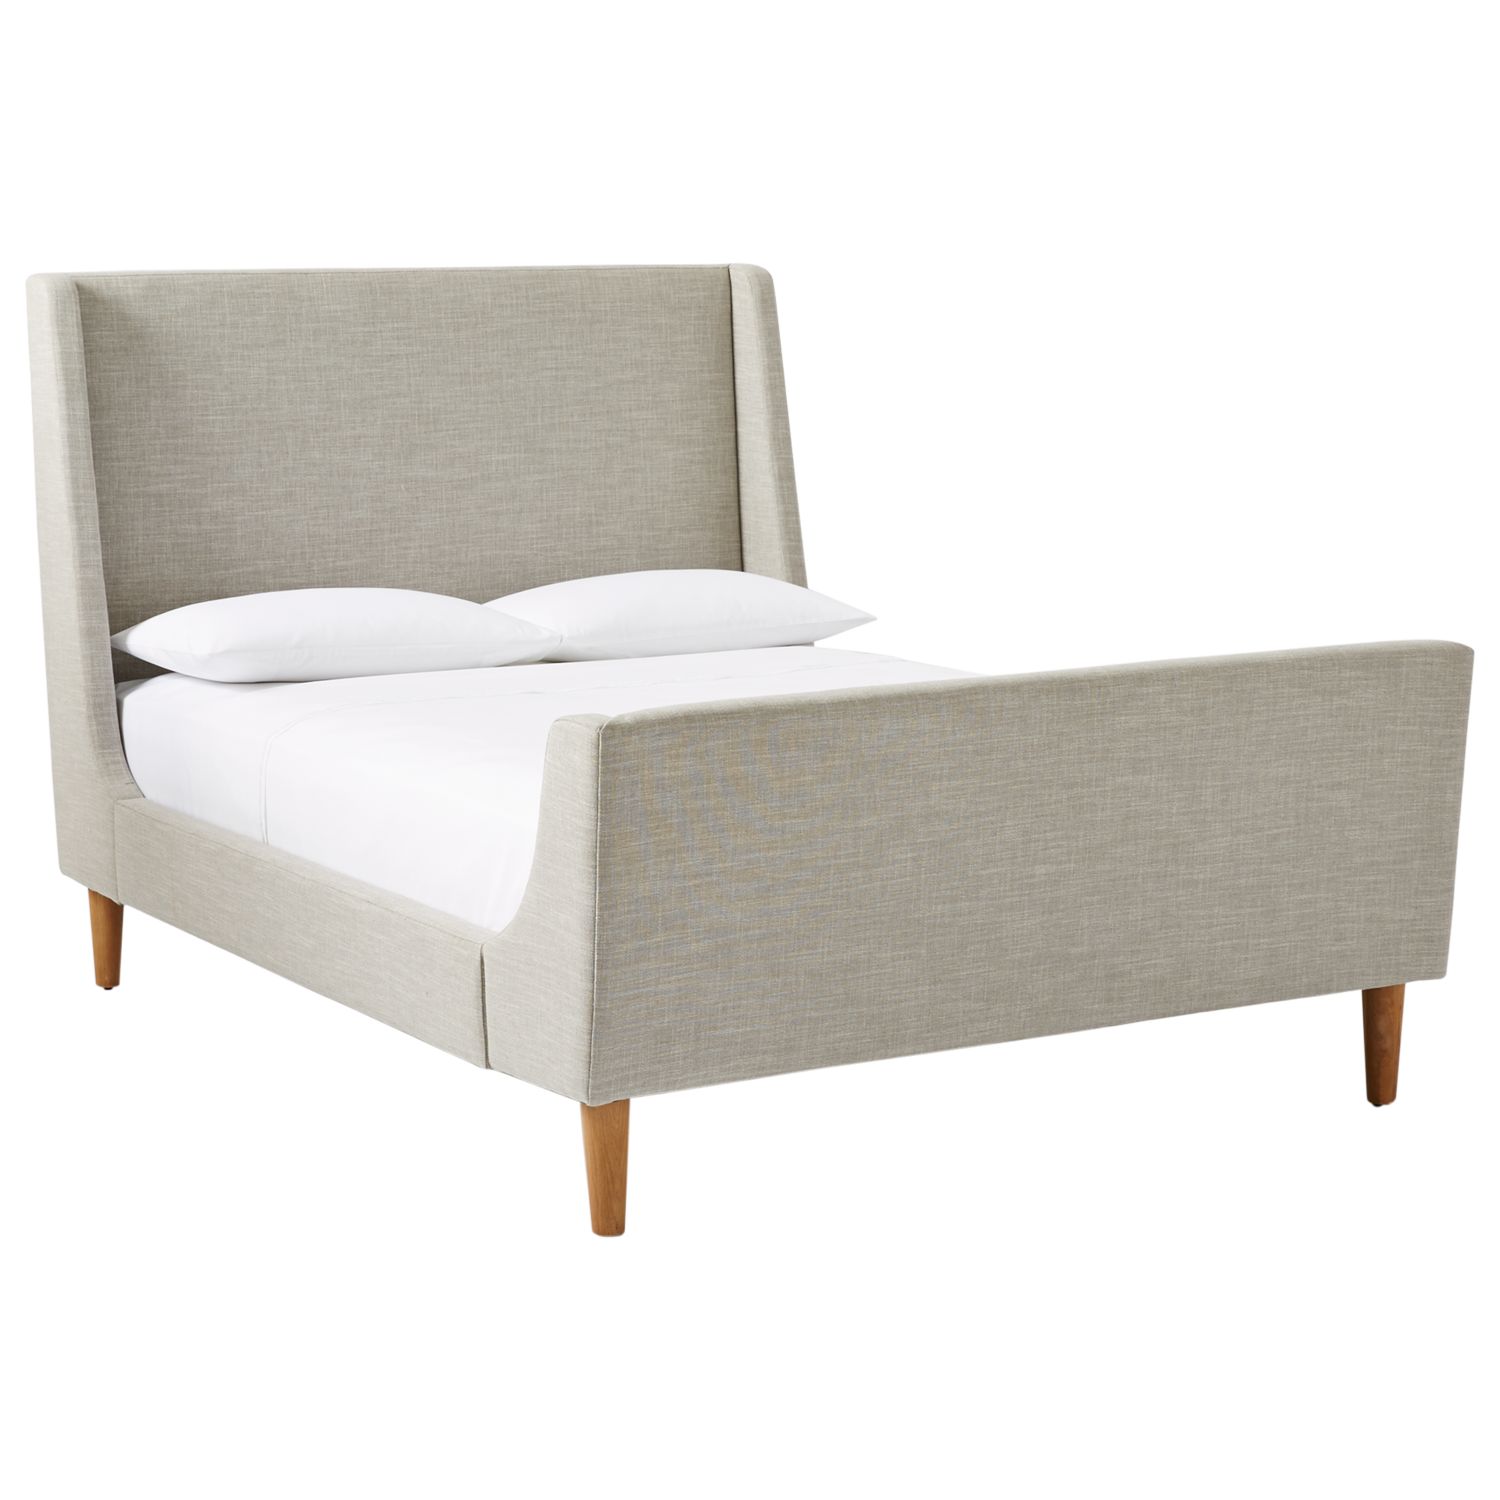 west elm Upholstered Sleigh Bed, King Size